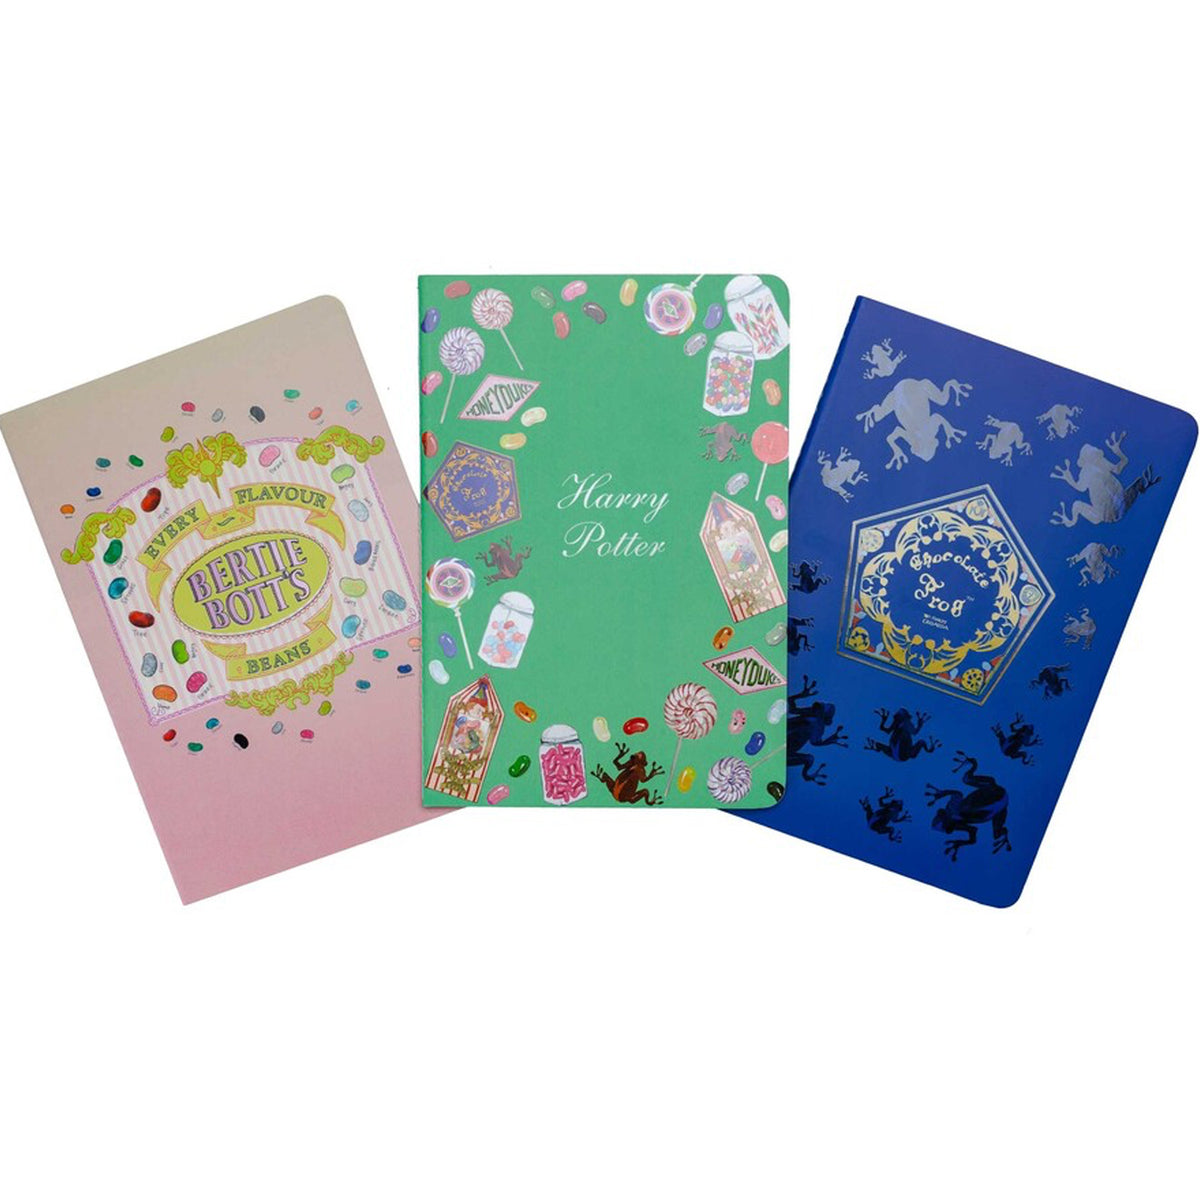 Harry Potter: Honeydukes Planner Notebook Collection